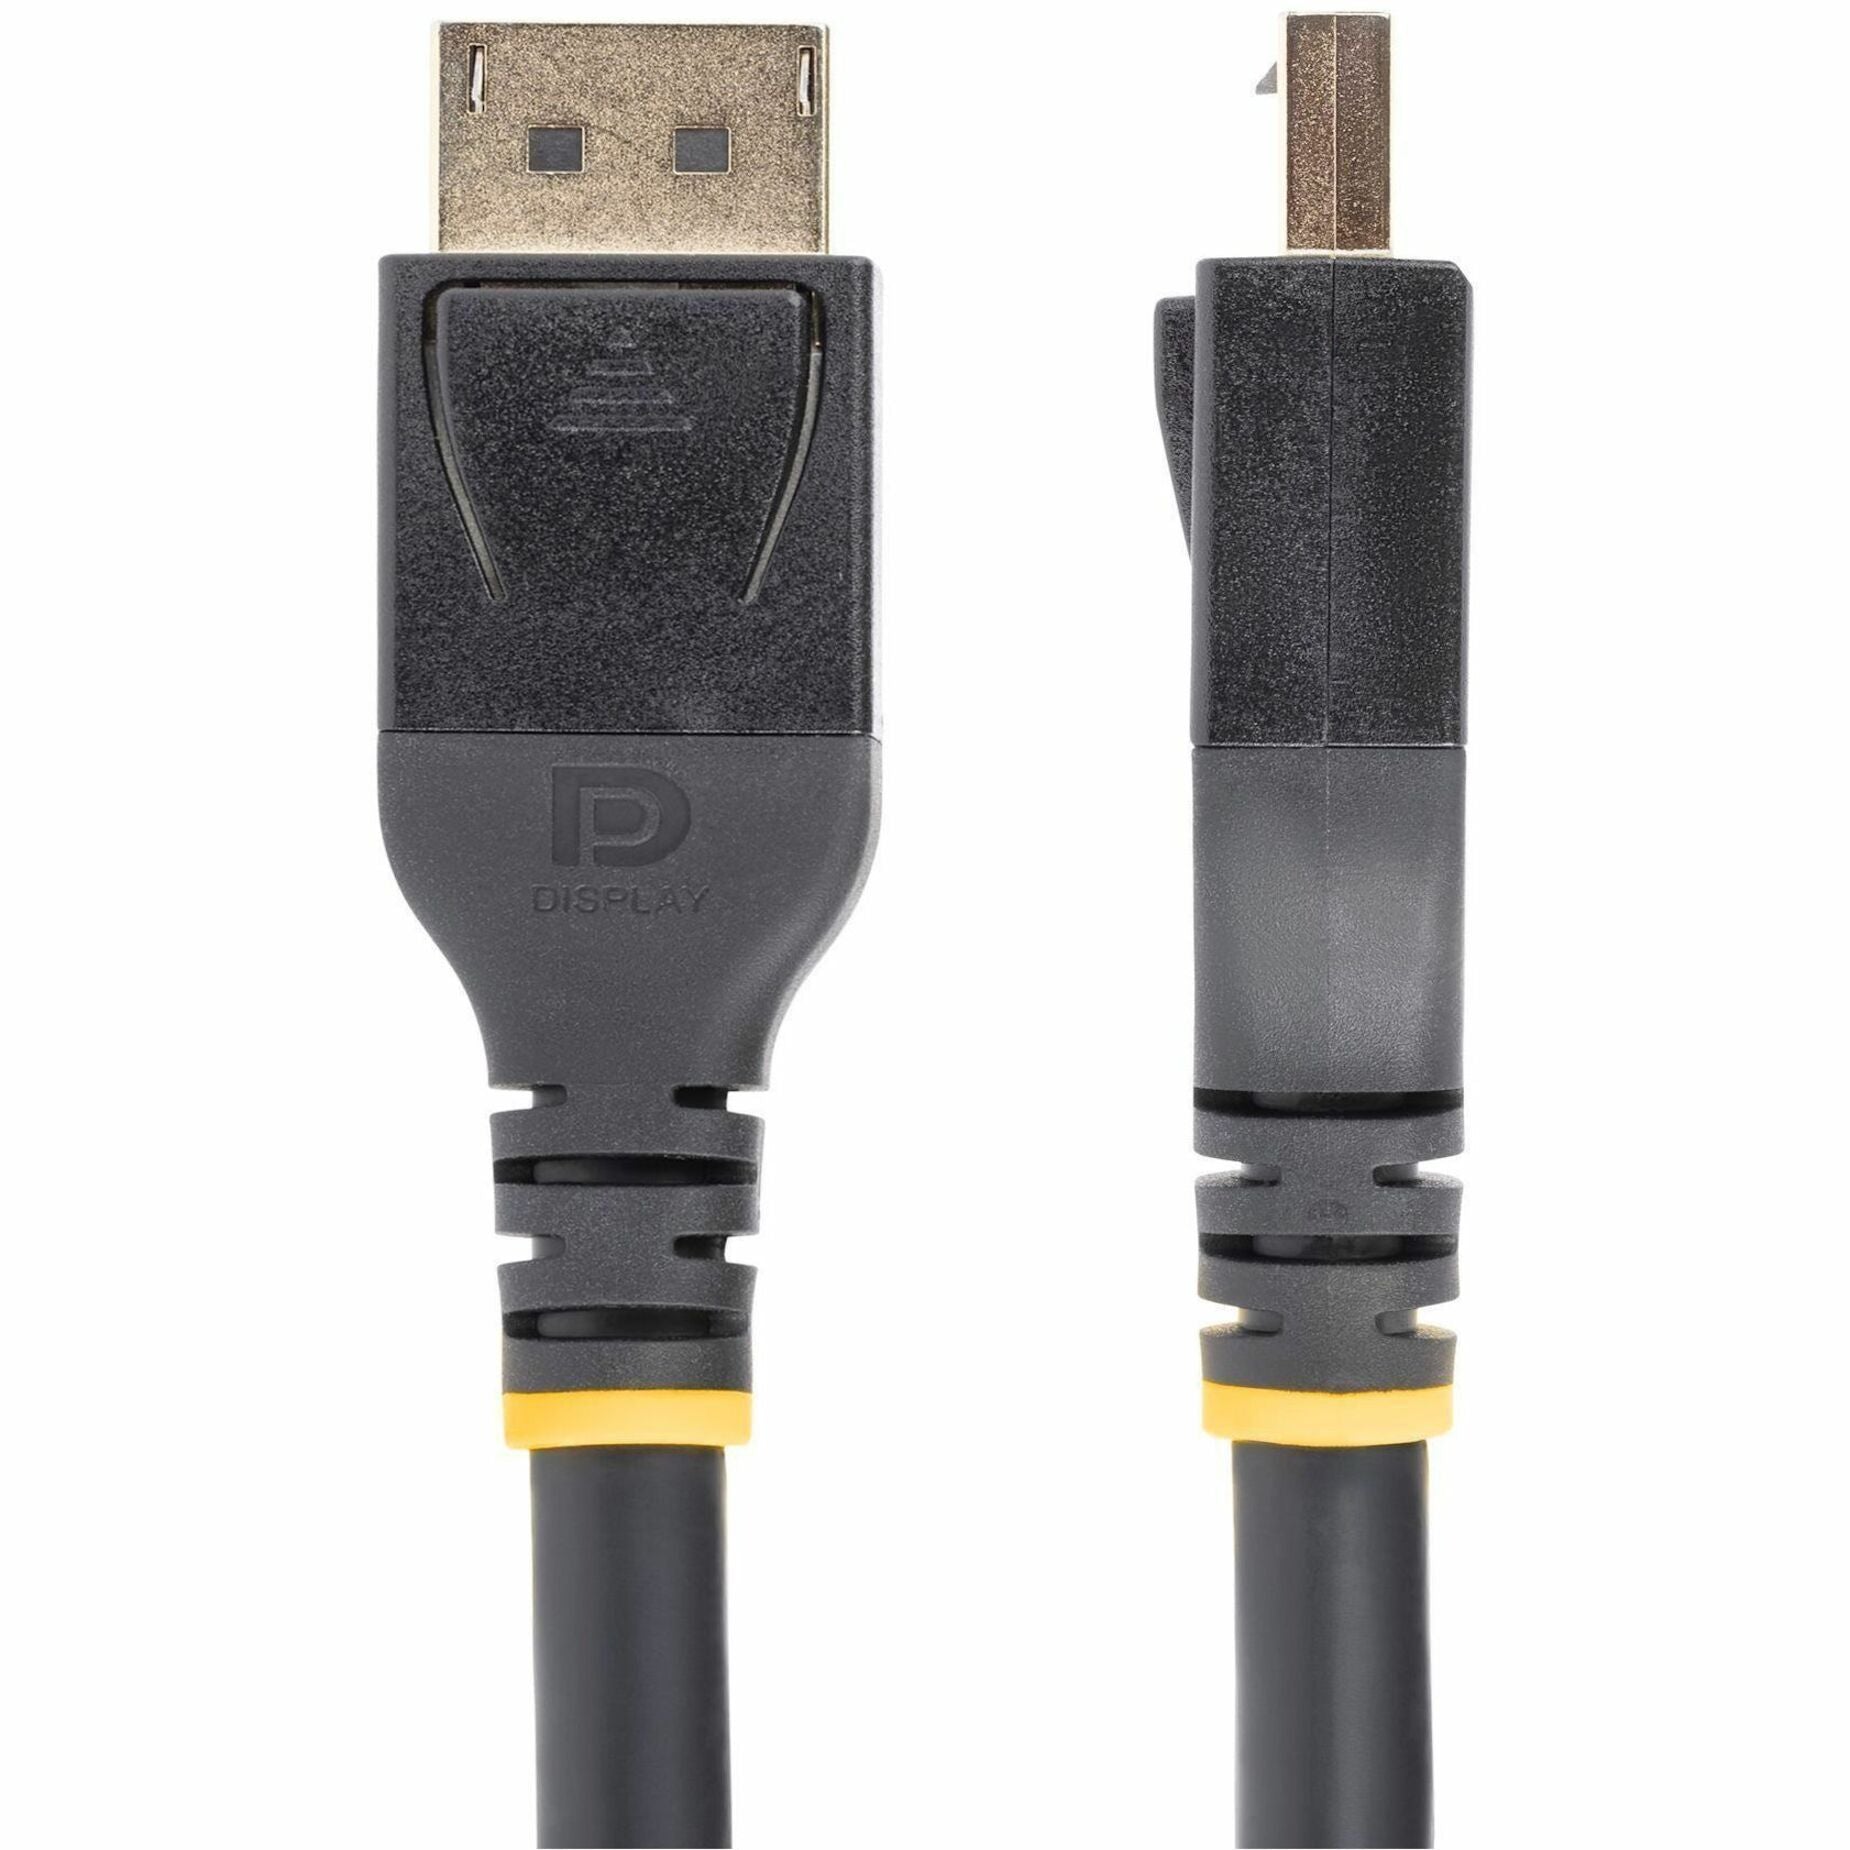 StarTech.com DP14A-10M-DP-CABLE DisplayPort Audio/Video Cable, 33 ft, Bendable, HDR10 Support, 25.9 Gbit/s Data Transfer Rate